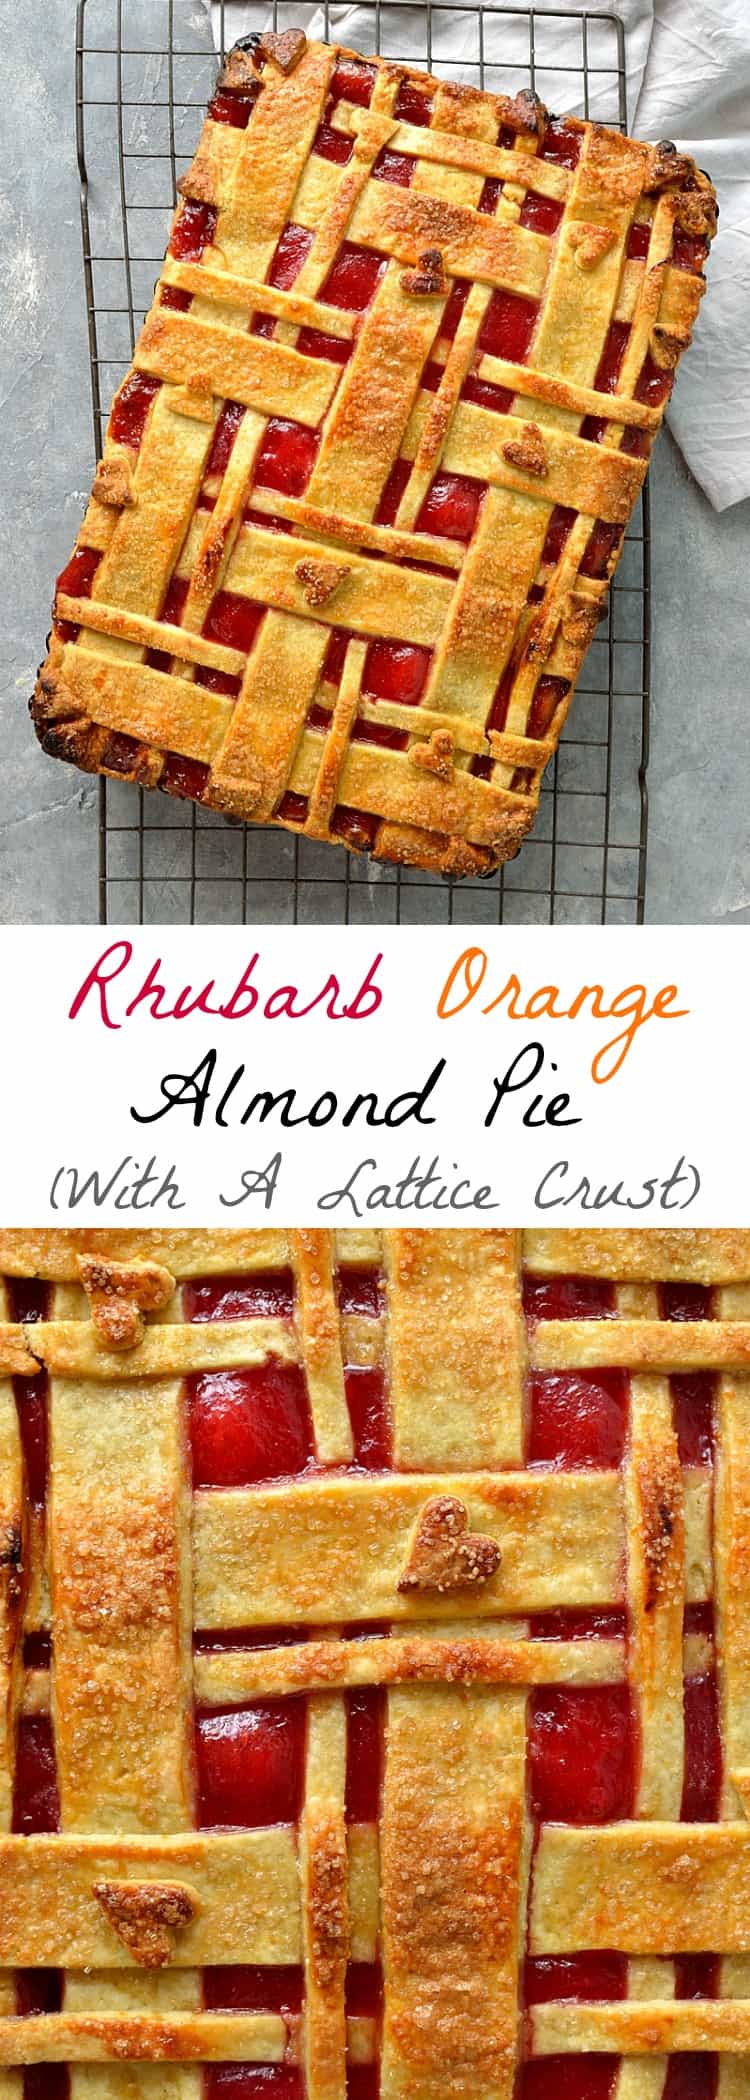 Rhubarb orange almond pie - crisp orange pastry filled with almond and orange frangipane and tart rhubarb compote, topped with a pretty lattice design.